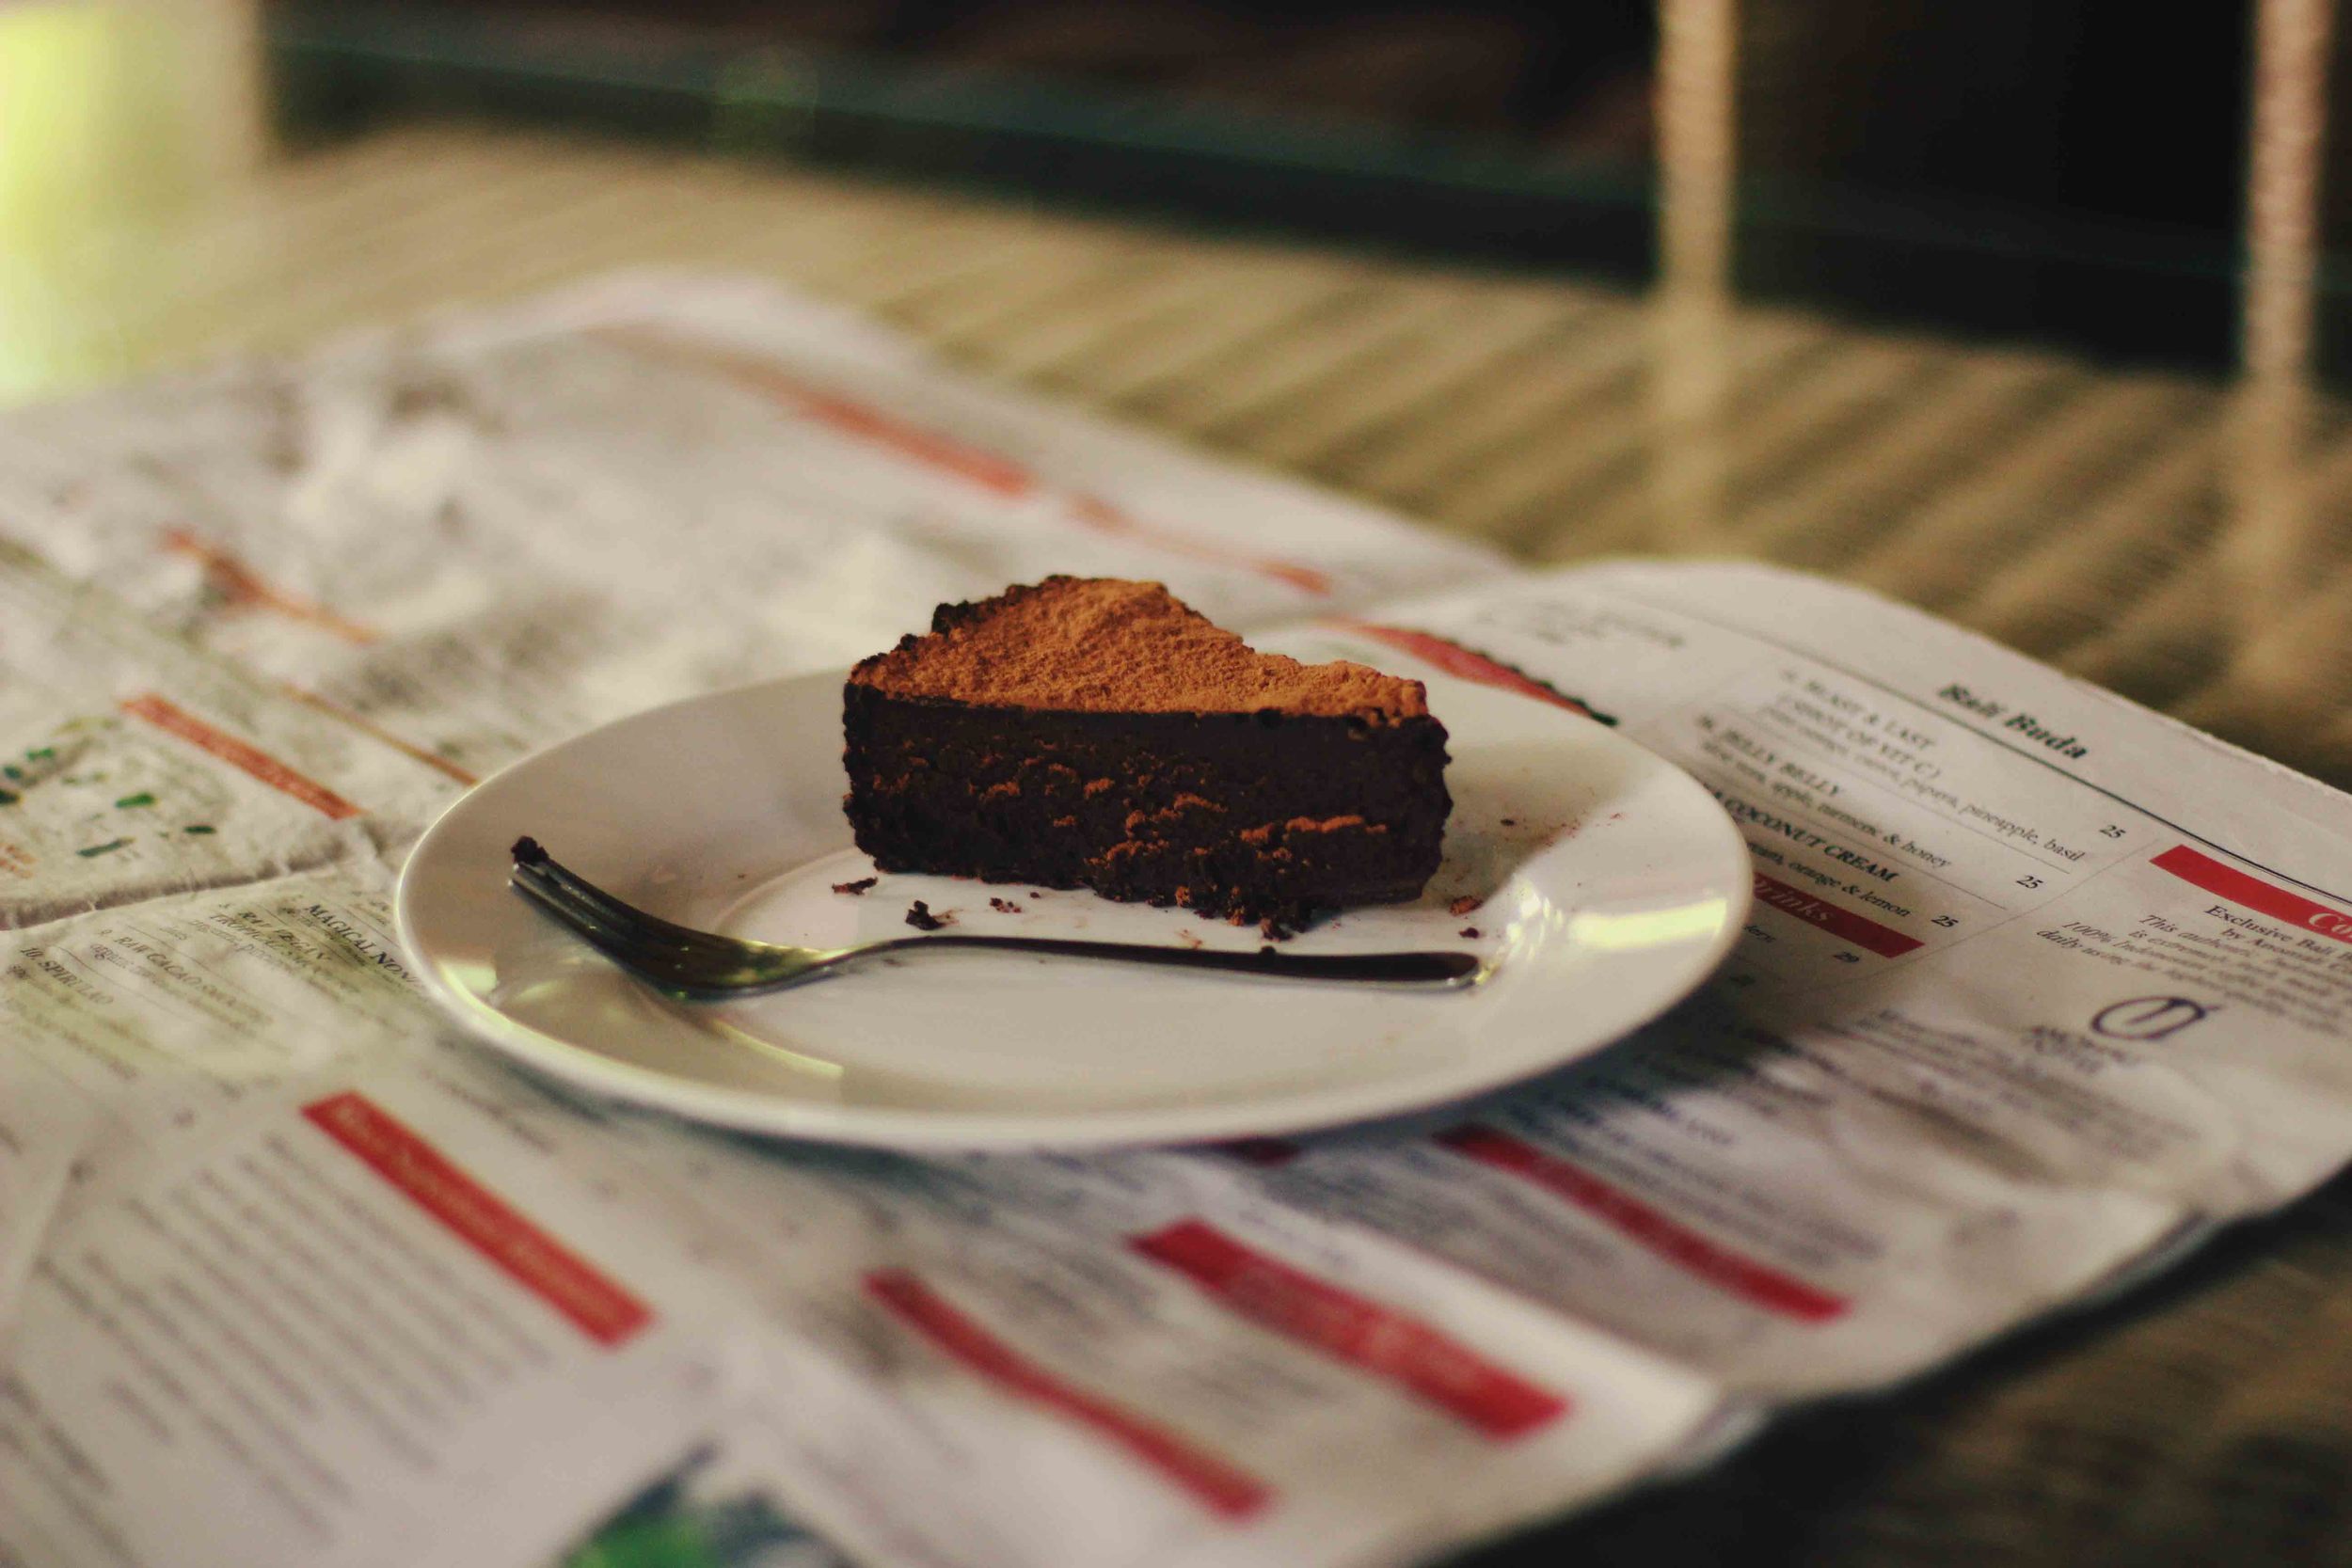 Chocolate Mousse Cake. Photo by Scarlett.